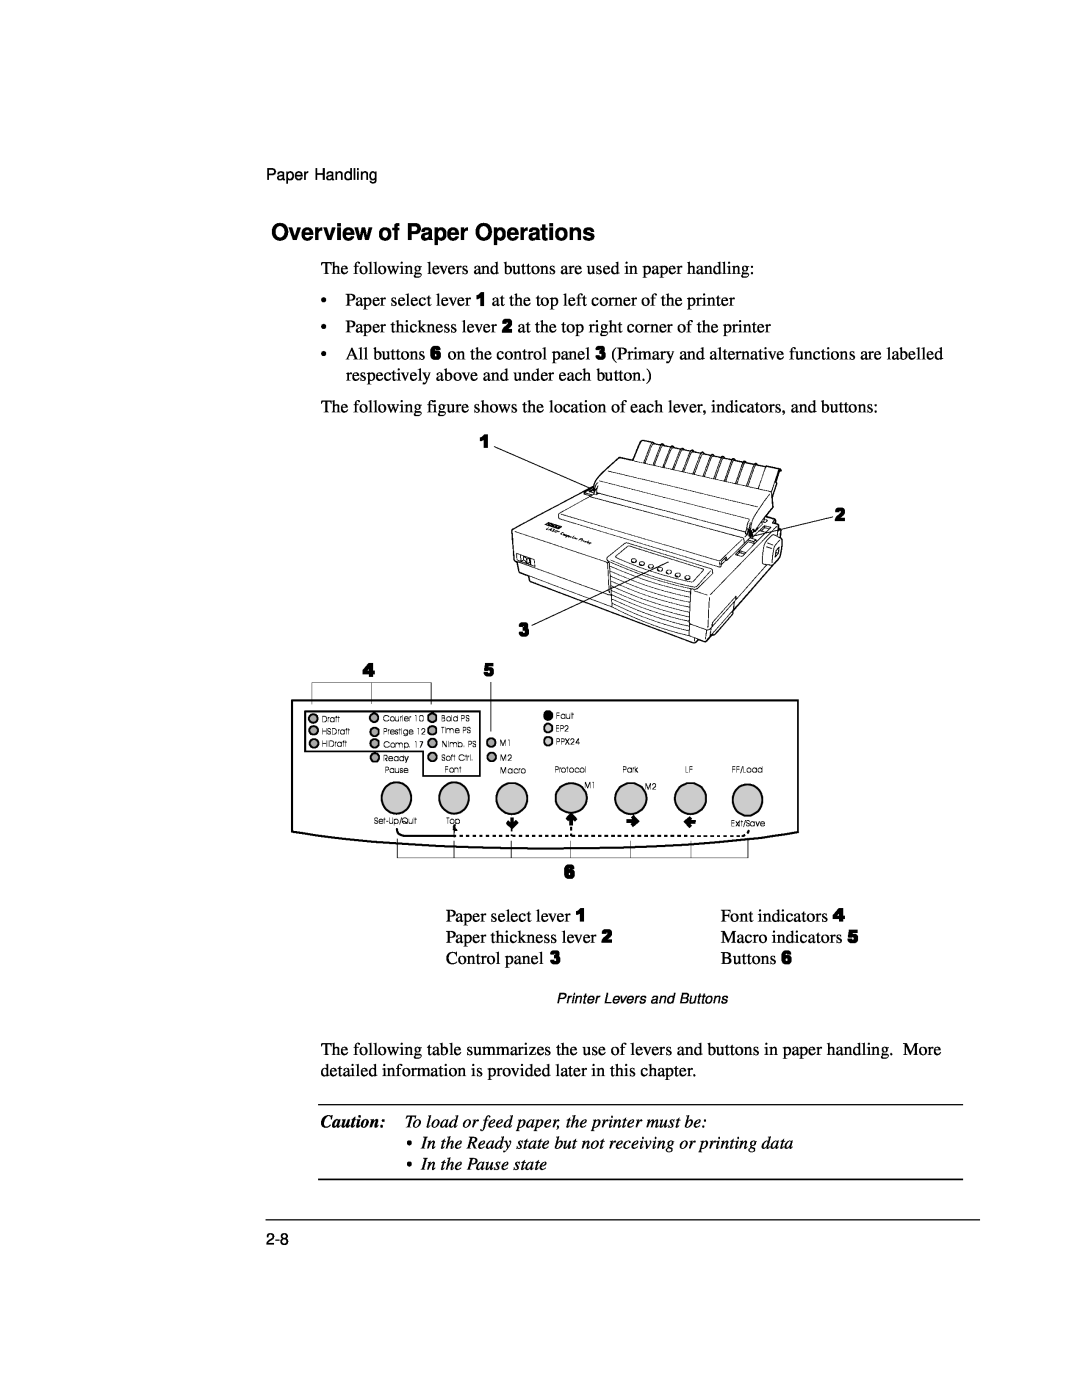 Genicom LA36 manual Overview of Paper Operations, Caution To load or feed paper, the printer must be, In the Pause state 